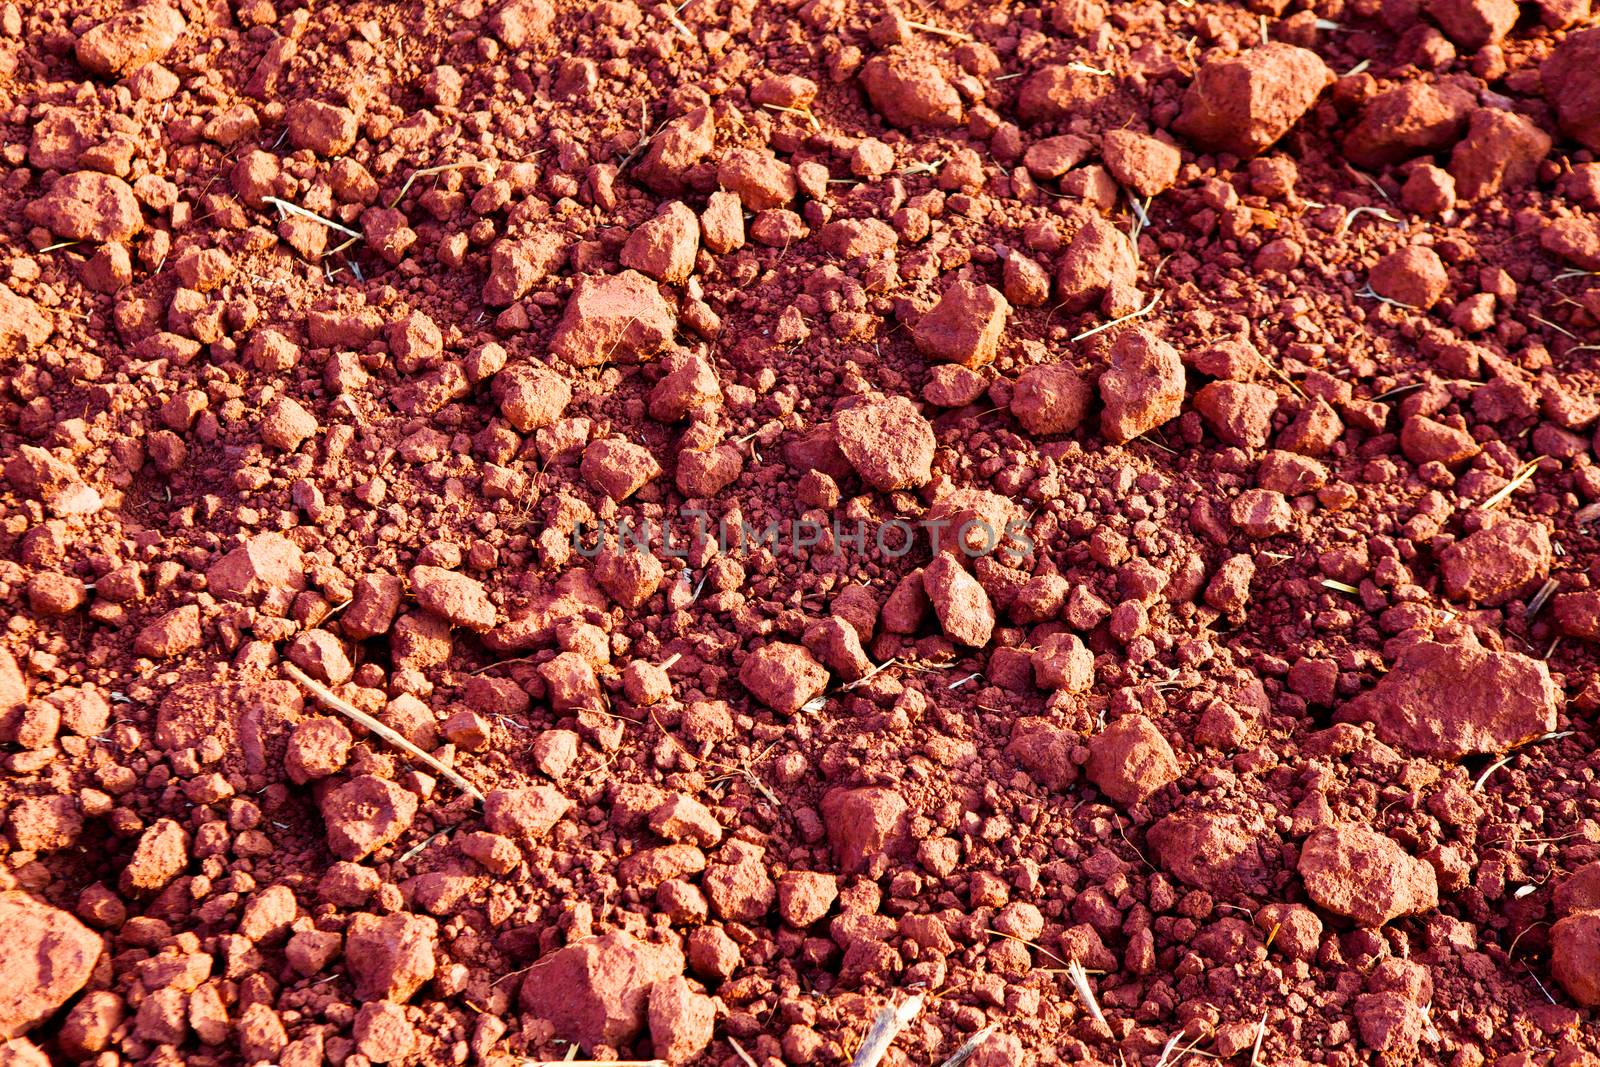  Laterite Soil texture by jee1999